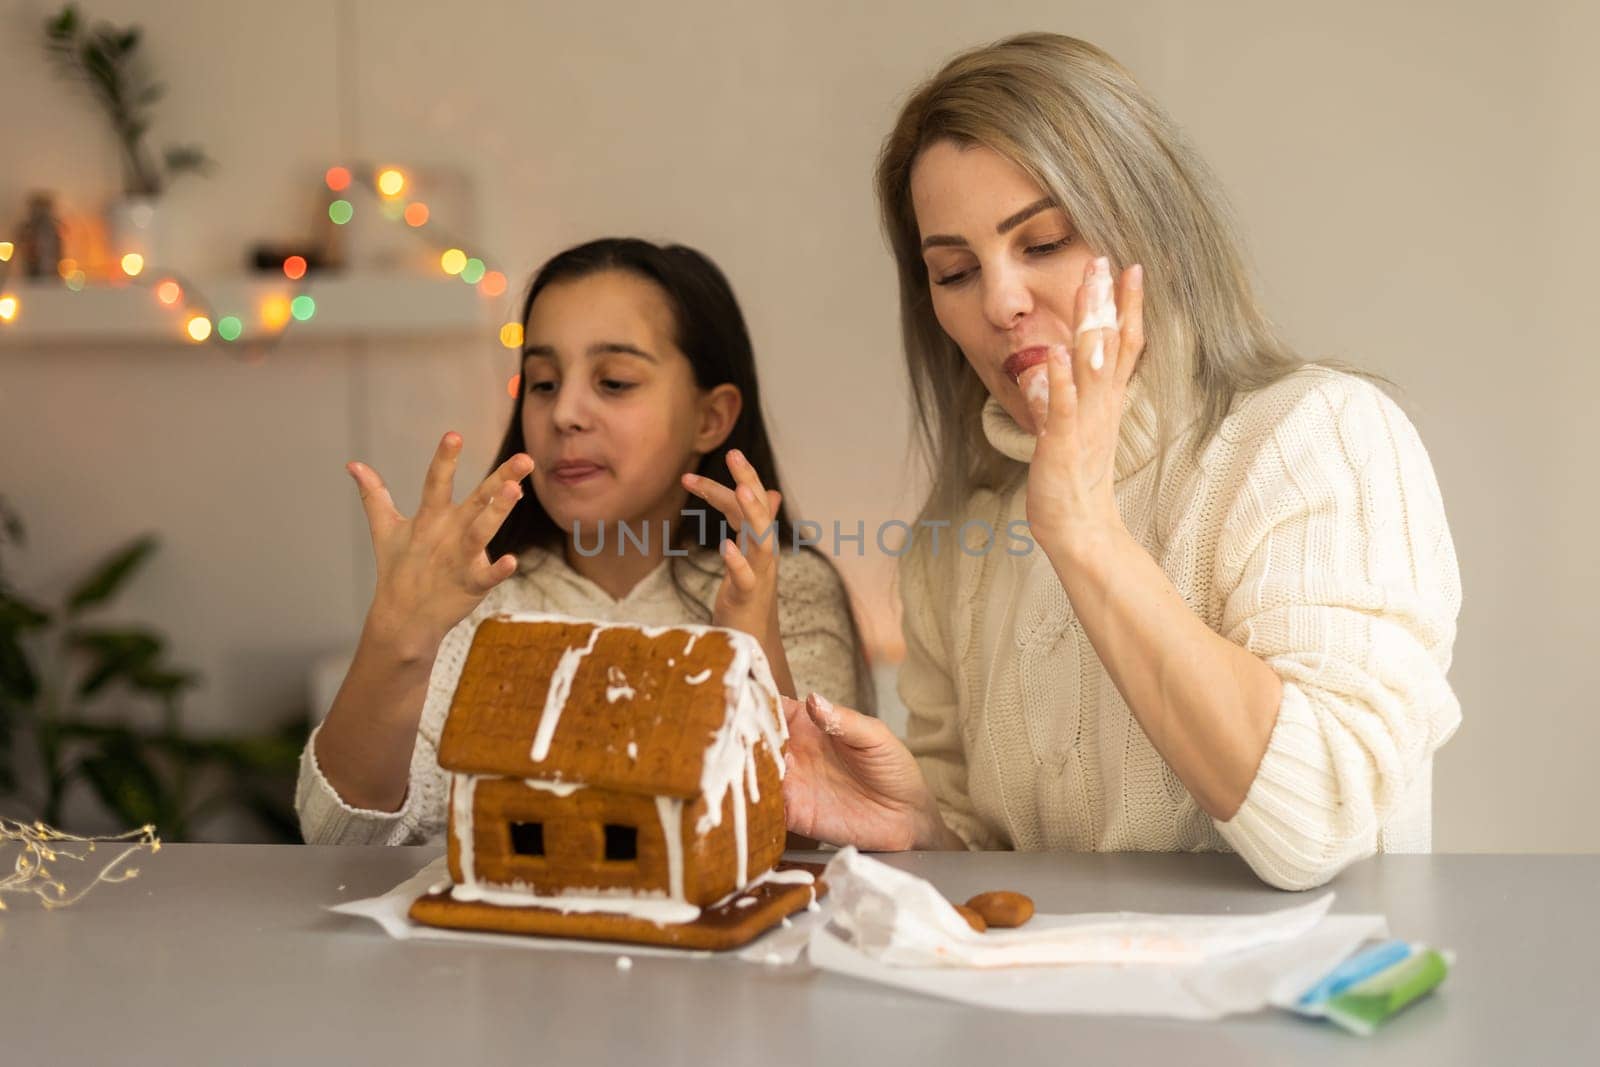 mother and daughter decorating gingerbread house. Beautiful living room with lights. Happy family celebrating holiday together. by Andelov13